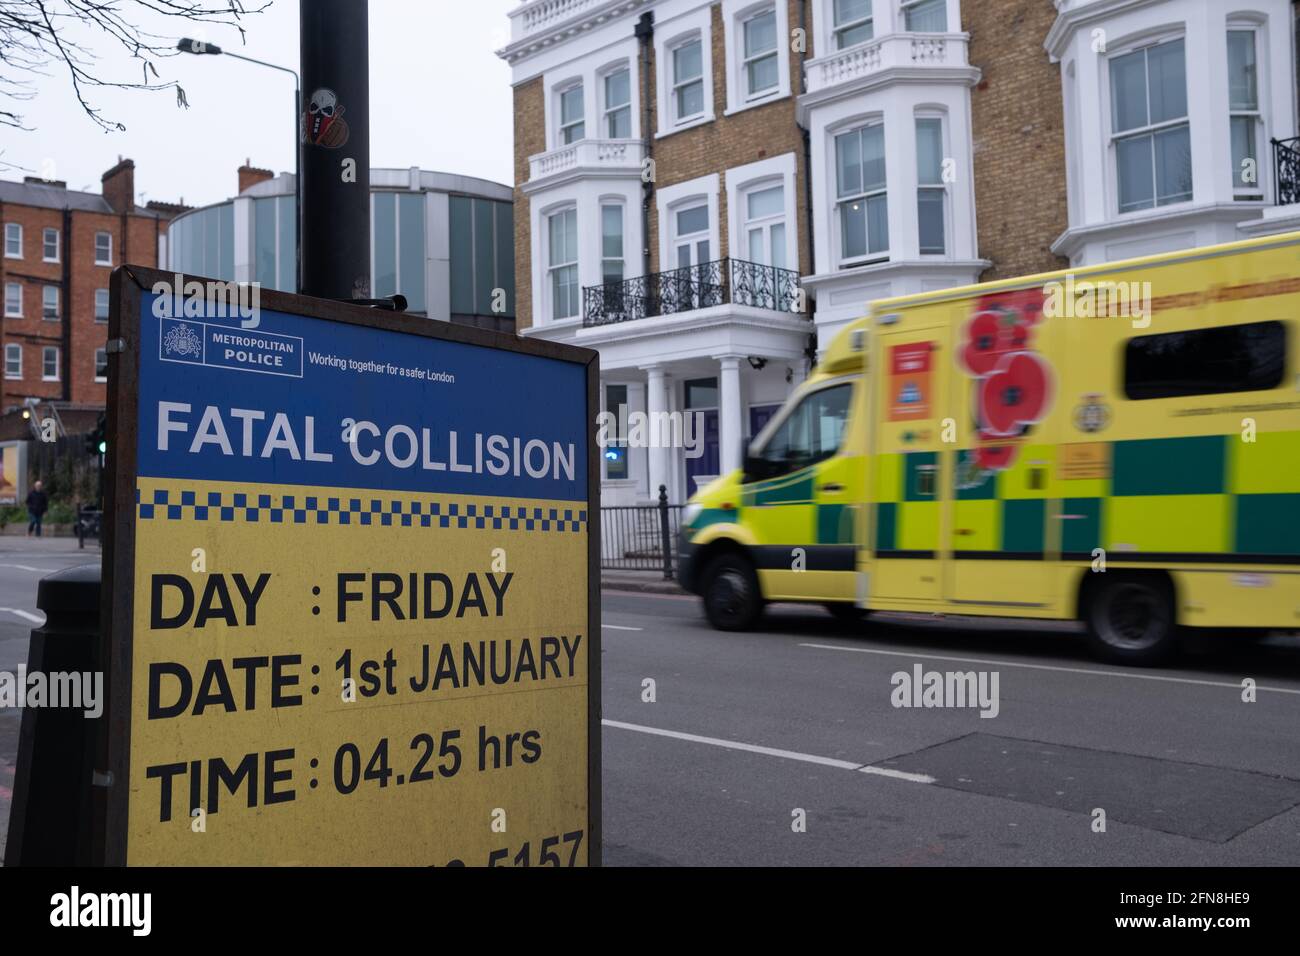 West London, March 2021:  A police notice of fatal car crash and call for witness information, with an ambulance driving past in background Stock Photo